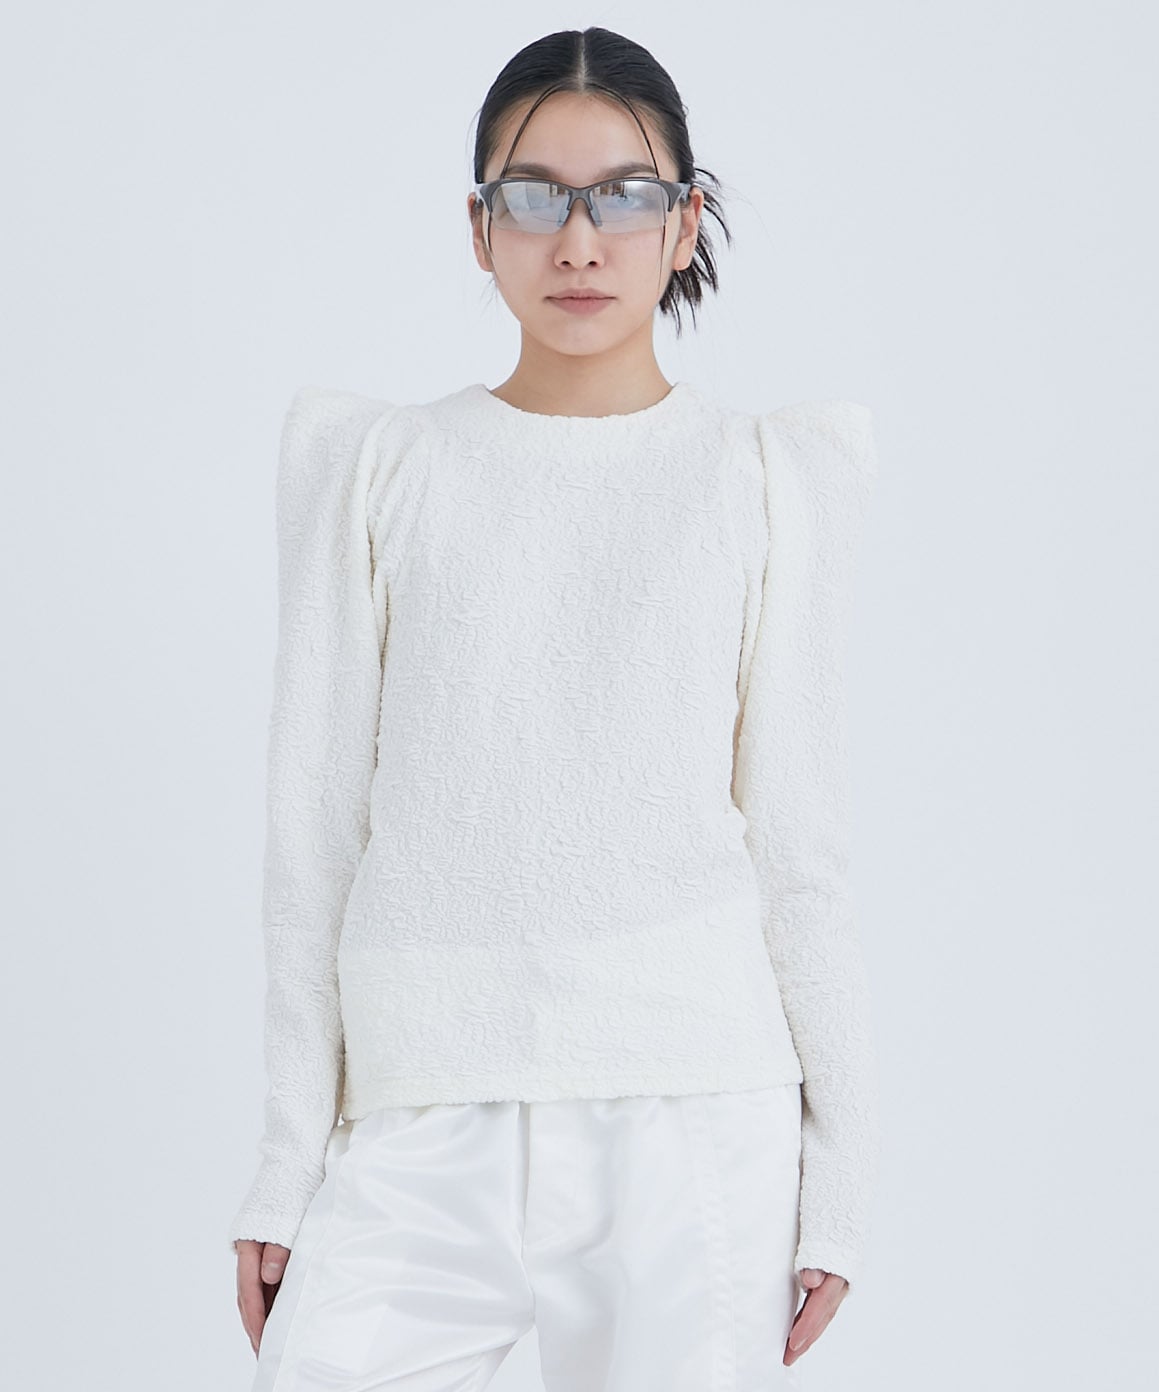 Mutton Sleeve Stretch Lace Top STUDIOUS